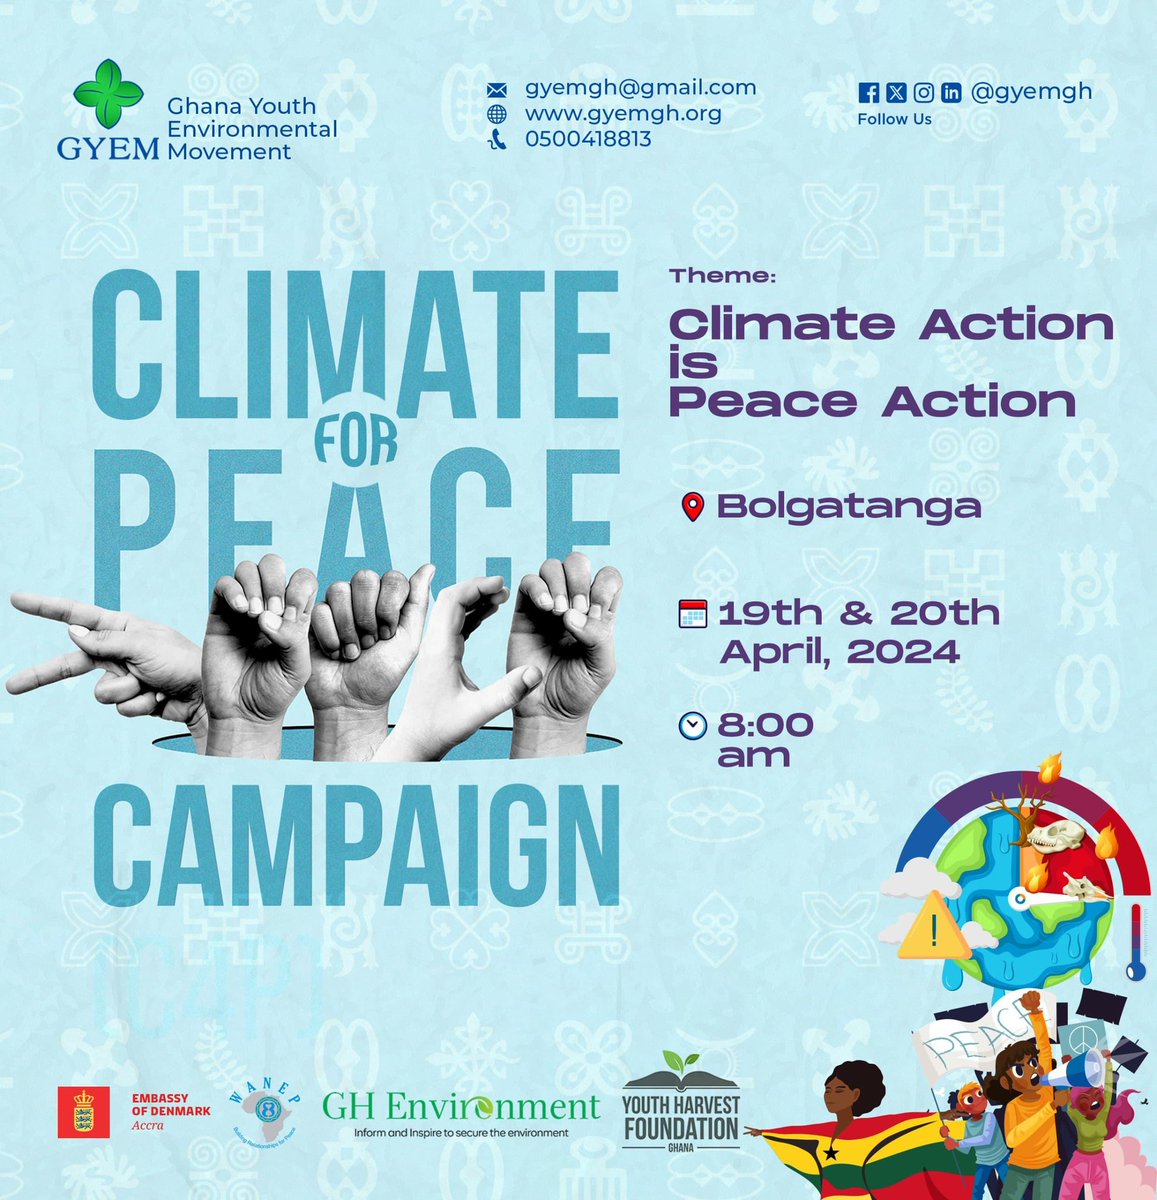 The campaign is part of the Climate Awareness and Peacebuilding (CAPE) project which is raising awareness of the link between climate action (SDG 13) and peacebuilding (SDG 16). Let’s all support this important initiative. #Climate4Peace